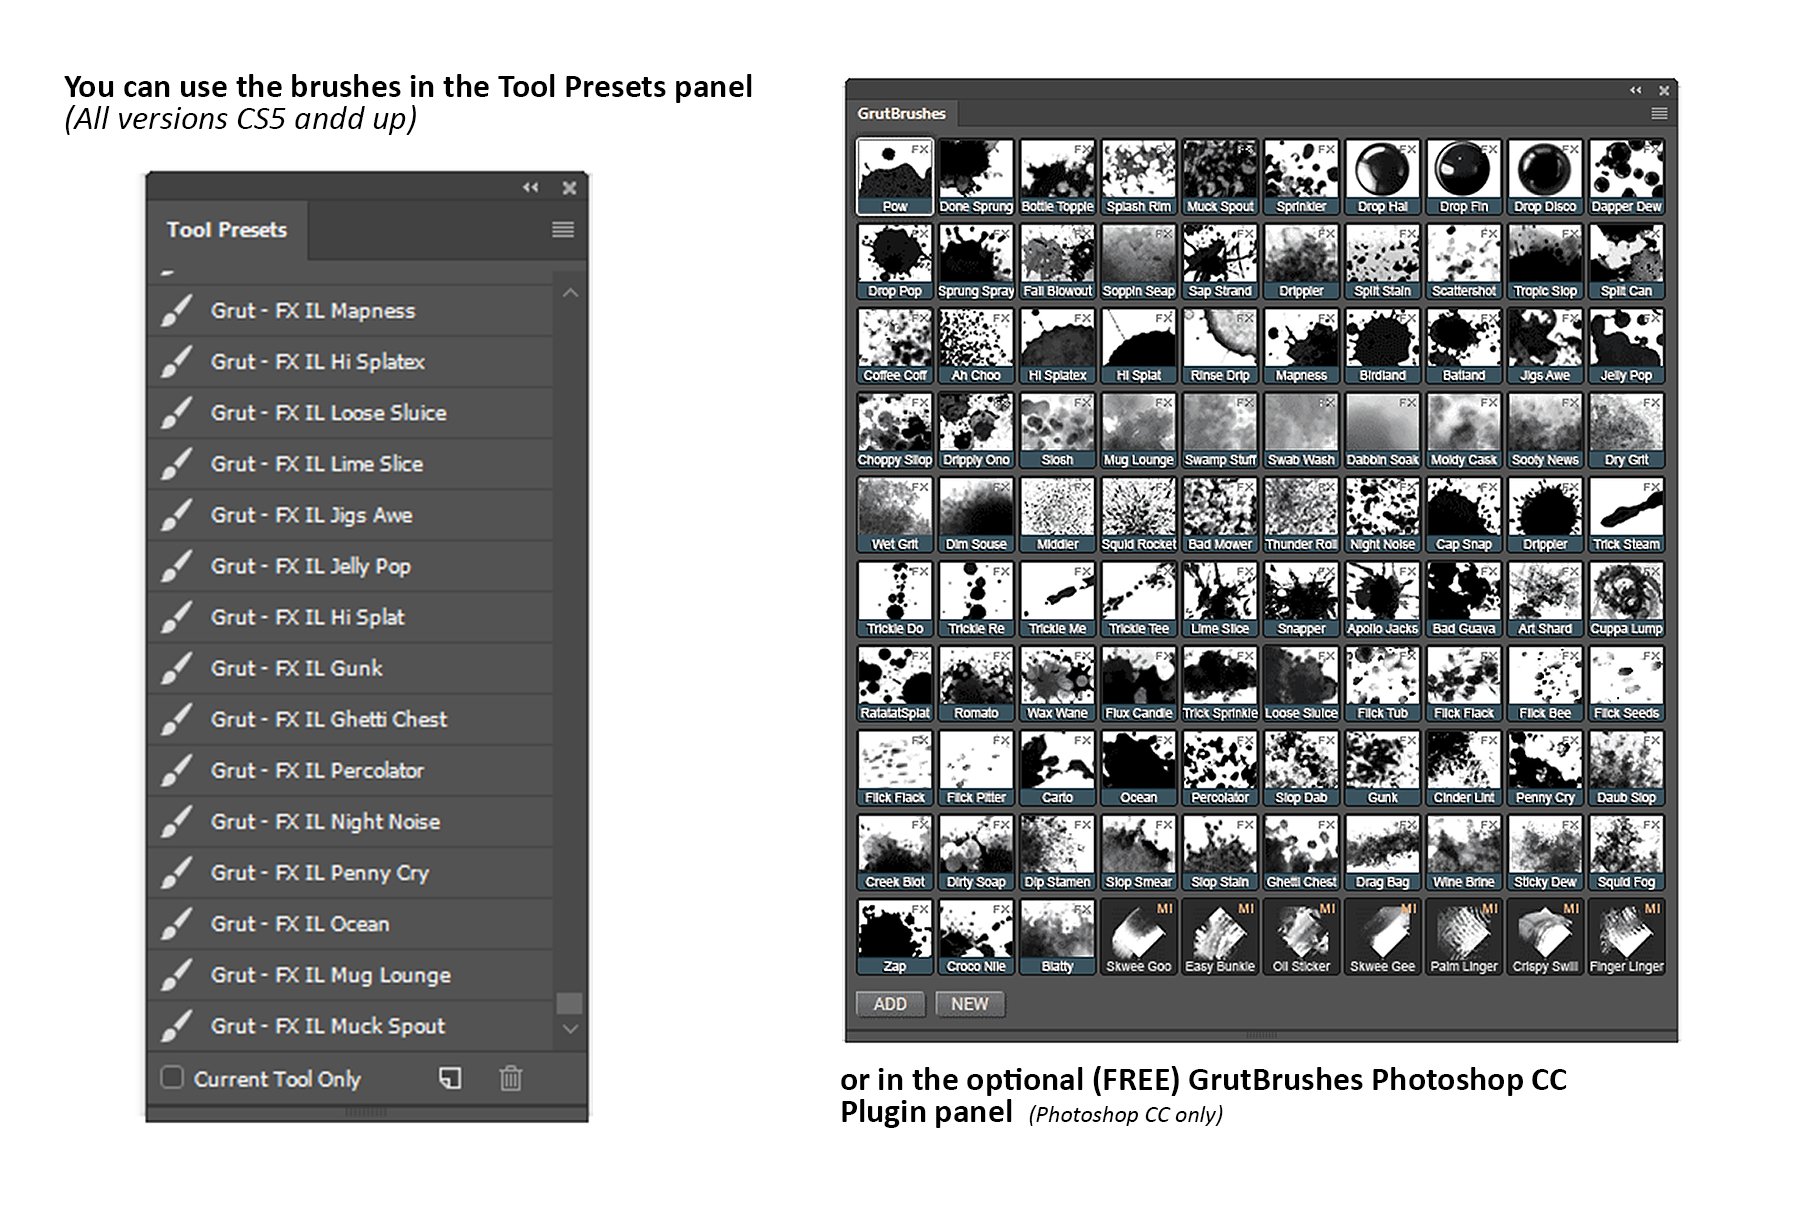 use in tool presets panel or in grutbrushes plugin 54